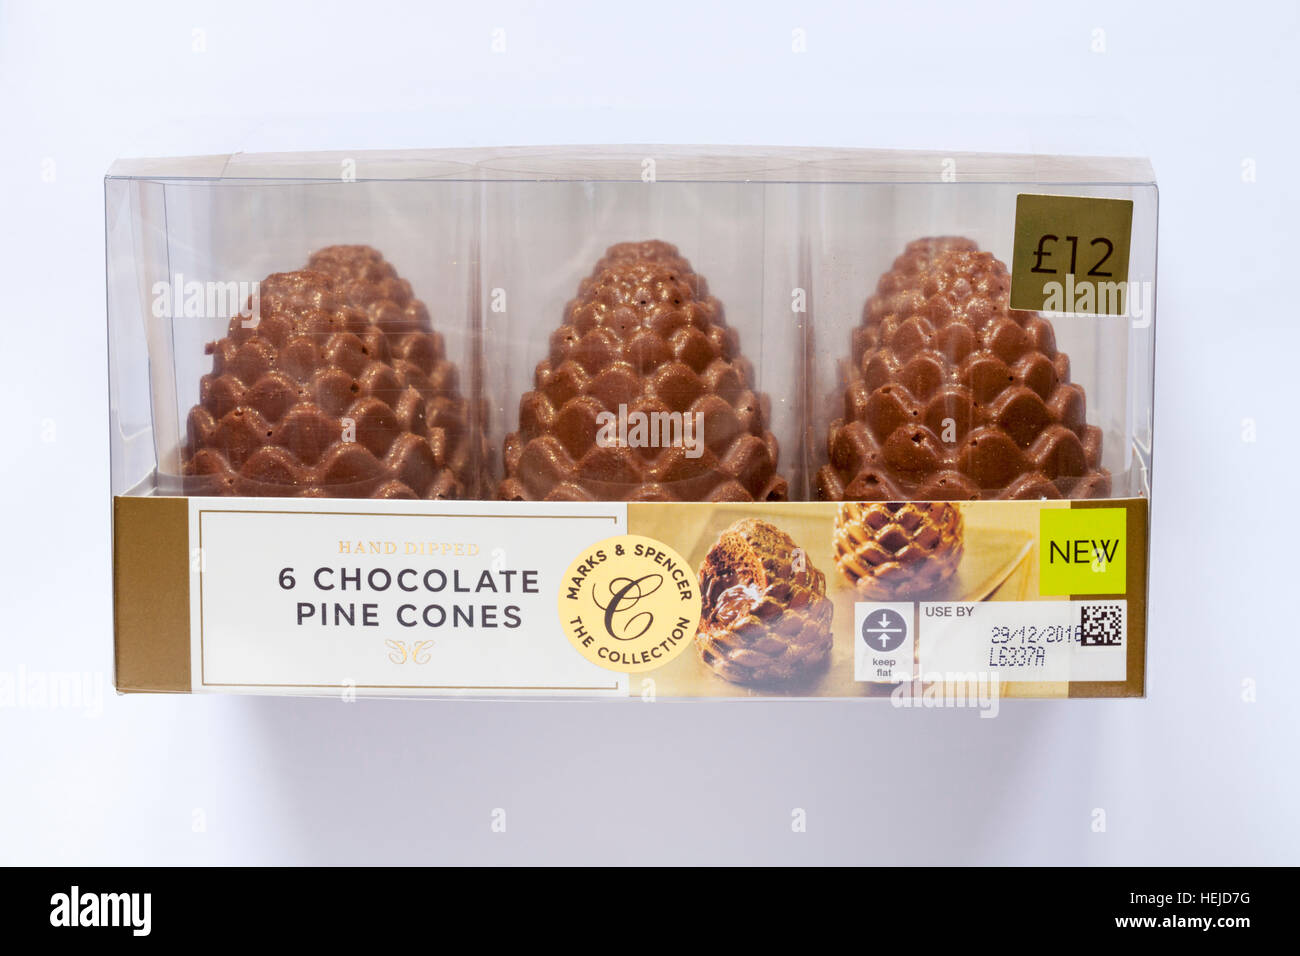 Pack of Marks & Spencer The Collection - hand dipped 6 chocolate pine cones isolated on white background Stock Photo